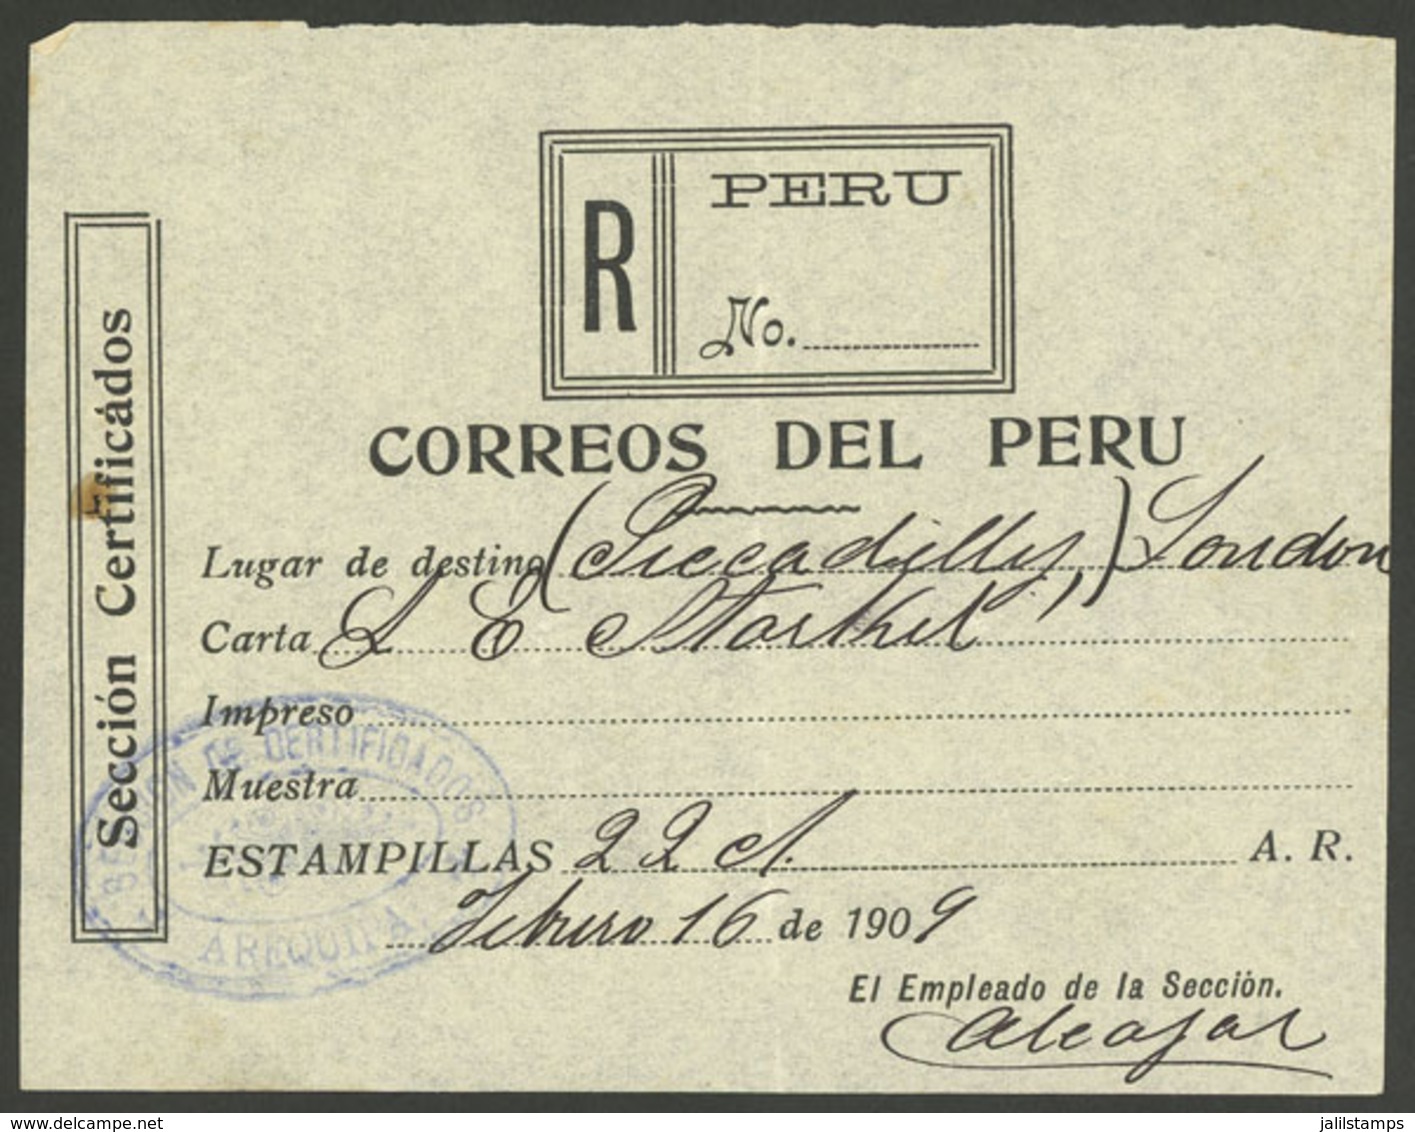 PERU: Receipt For A Registered Letter Sent From Arequipa To London On 16/FE/1909, VF Quality! Ex-Herbert Moll - Perú